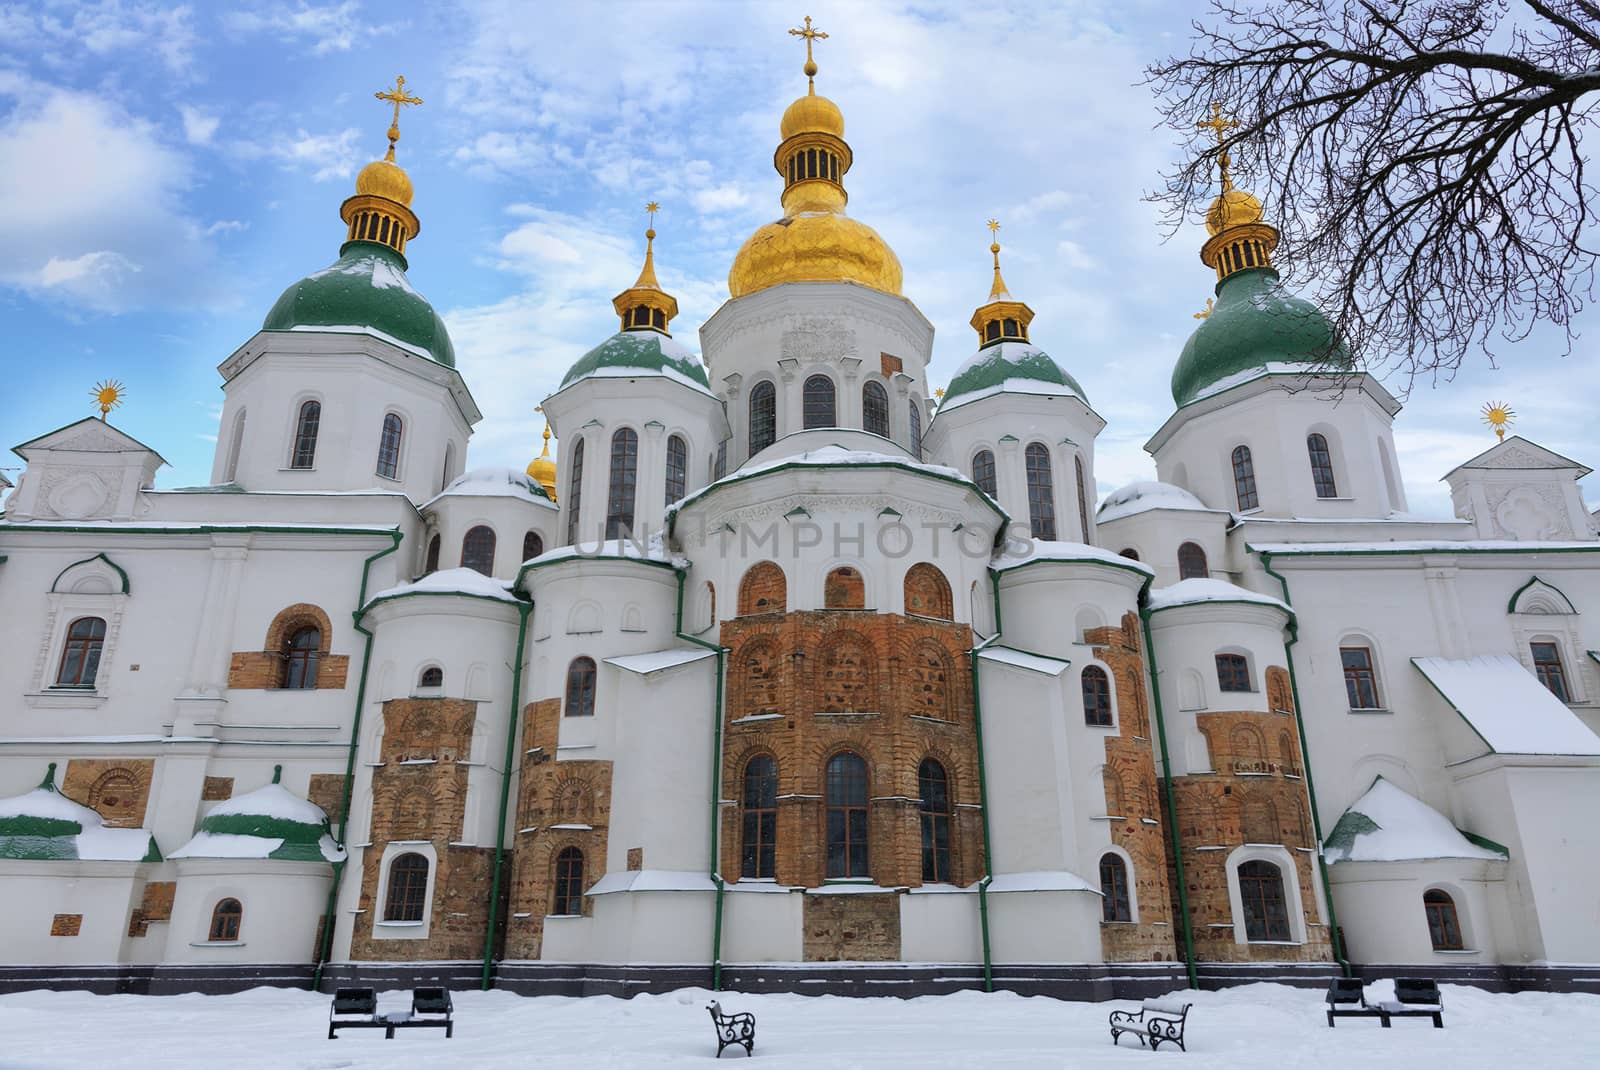 The famous St. Sophia Cathedral in Kyiv in the winter against the blue cloudy sky by Sergii